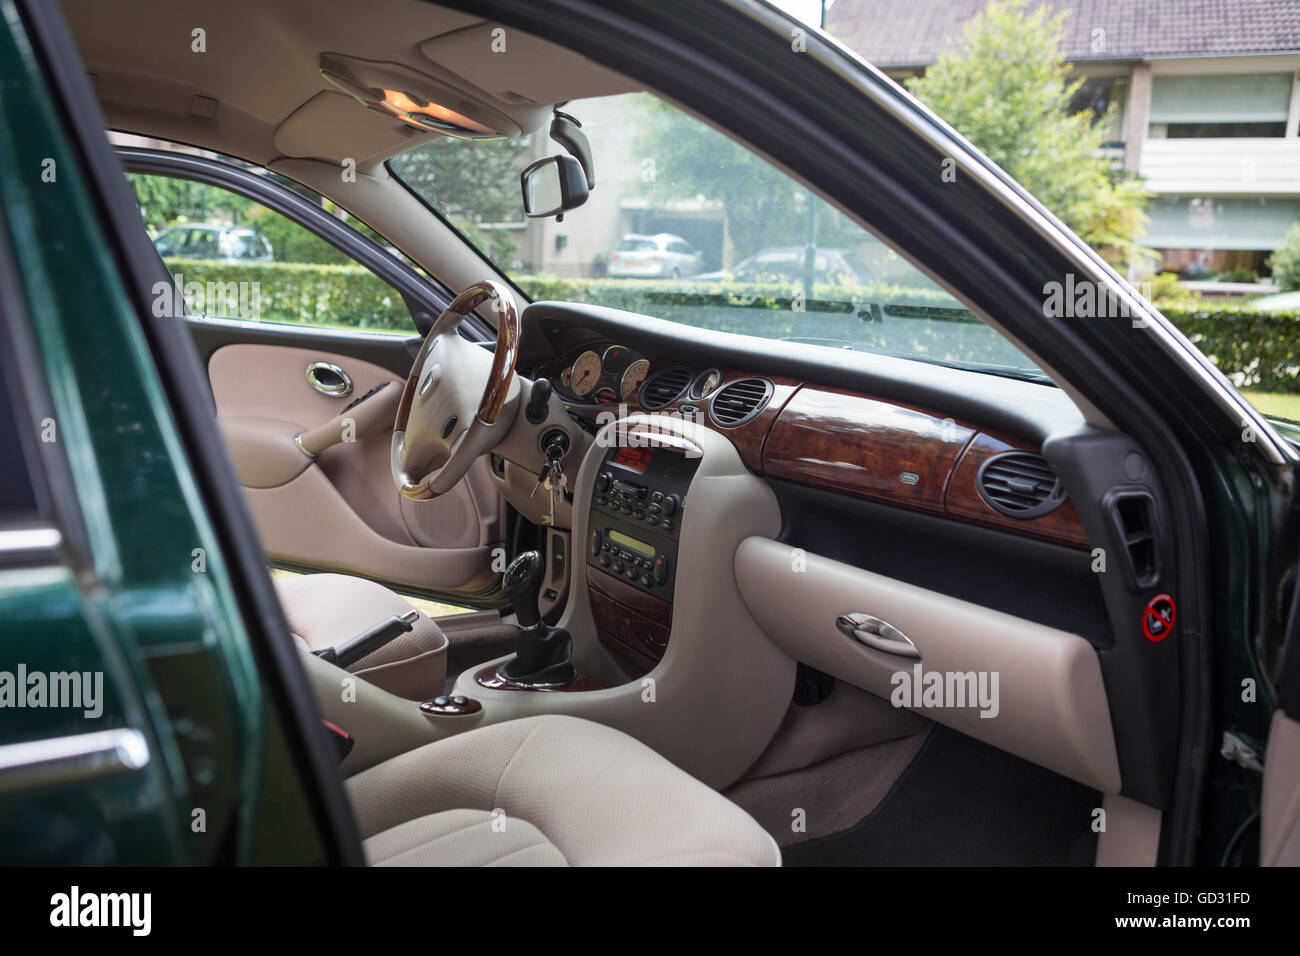 Rover 75 car interior color green with a walnut dashboard Stock Photo